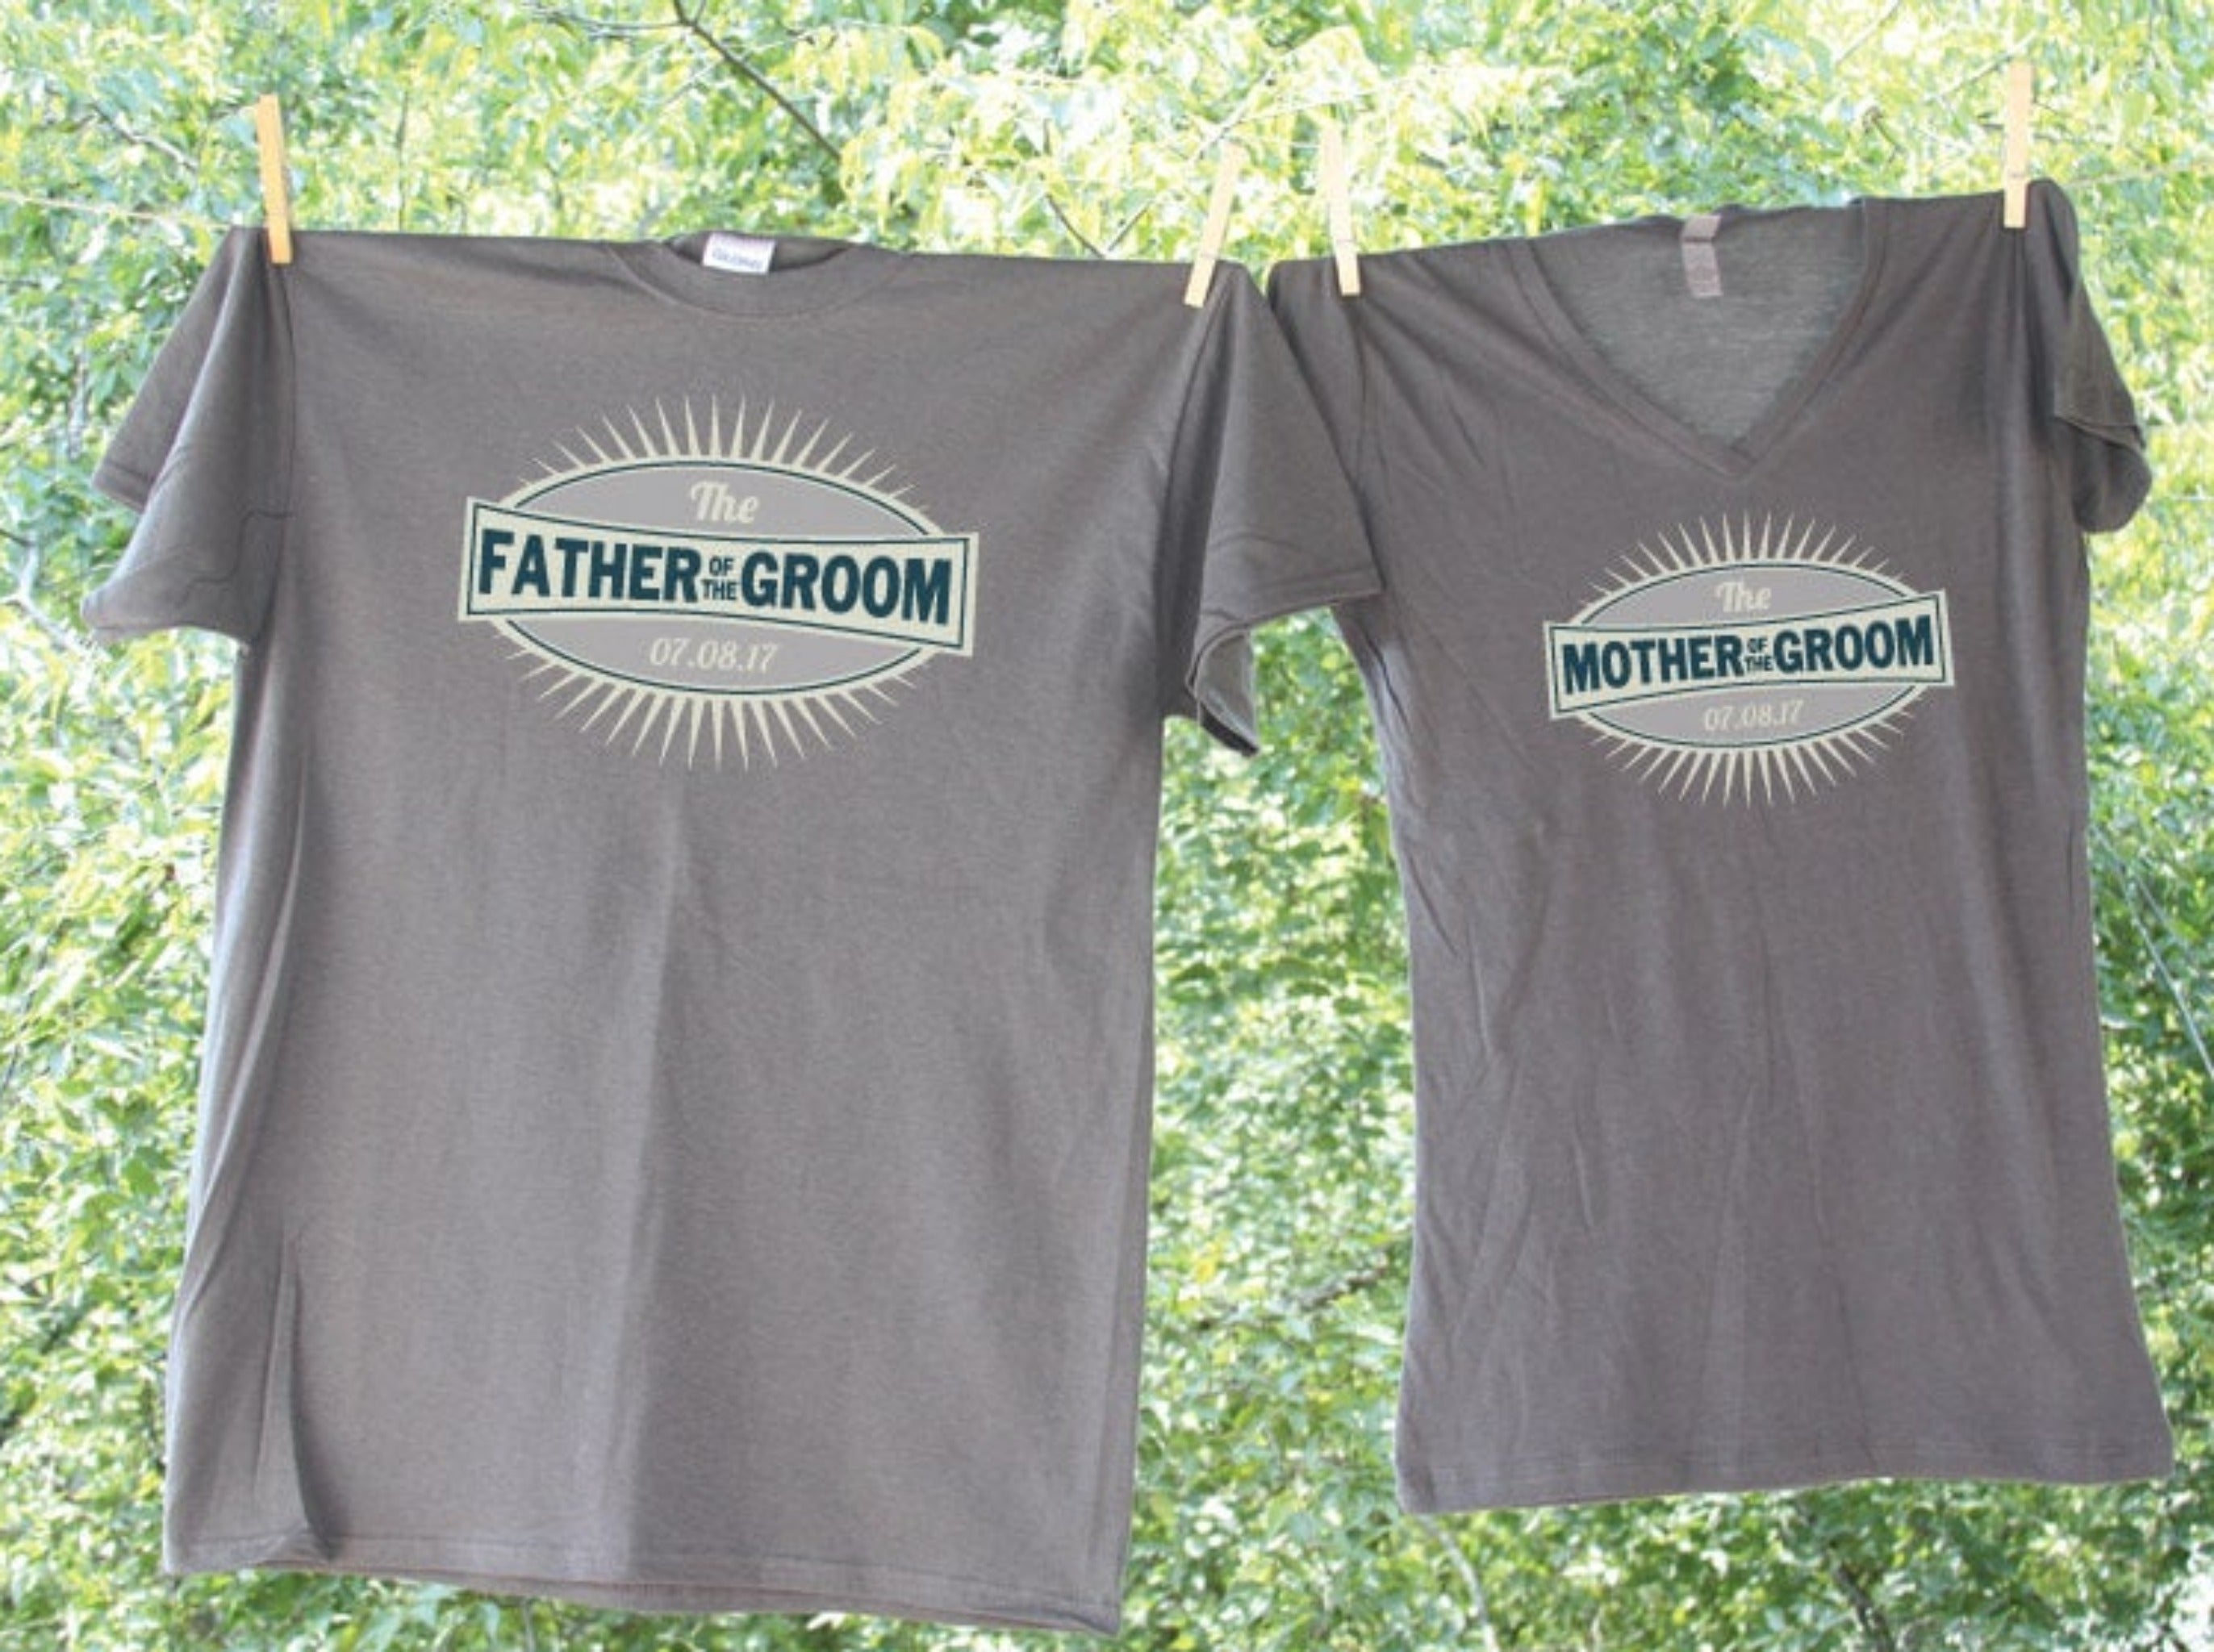 Father and Mother of the Groom Grey Emblem Shirt Set with date- two shirts